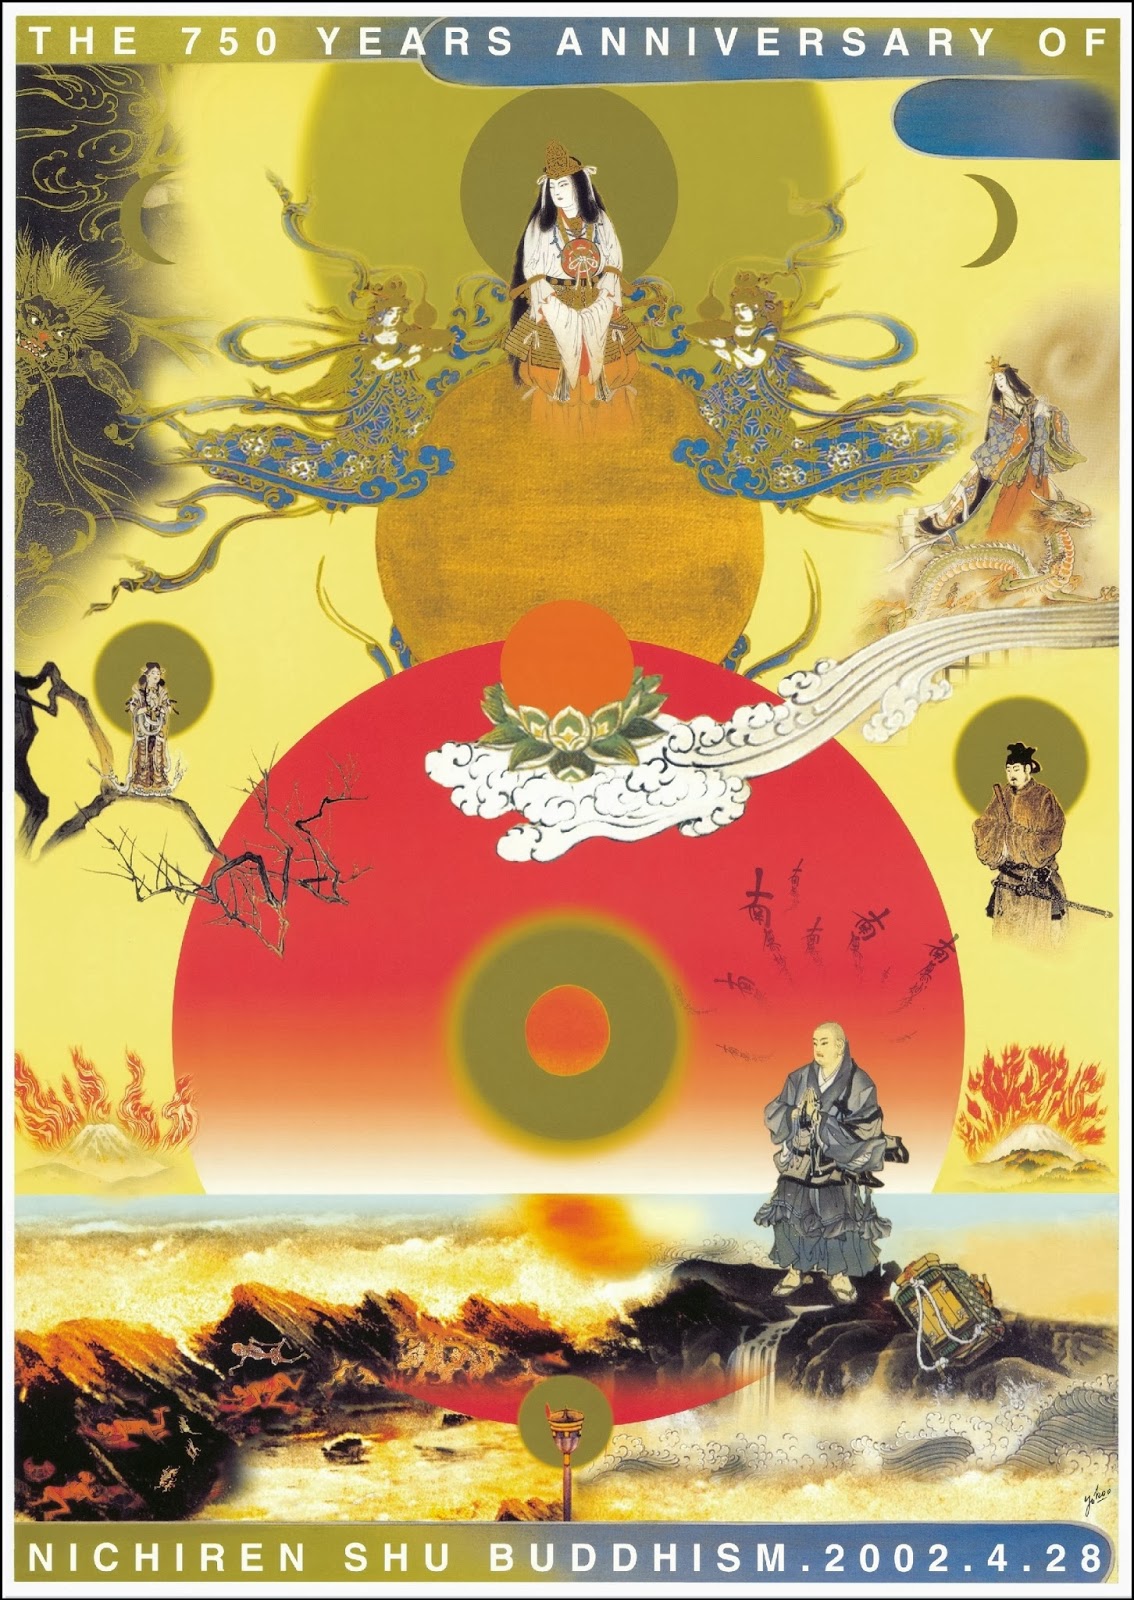 montage poster of various traditional Japanese folkloric characters and symbols